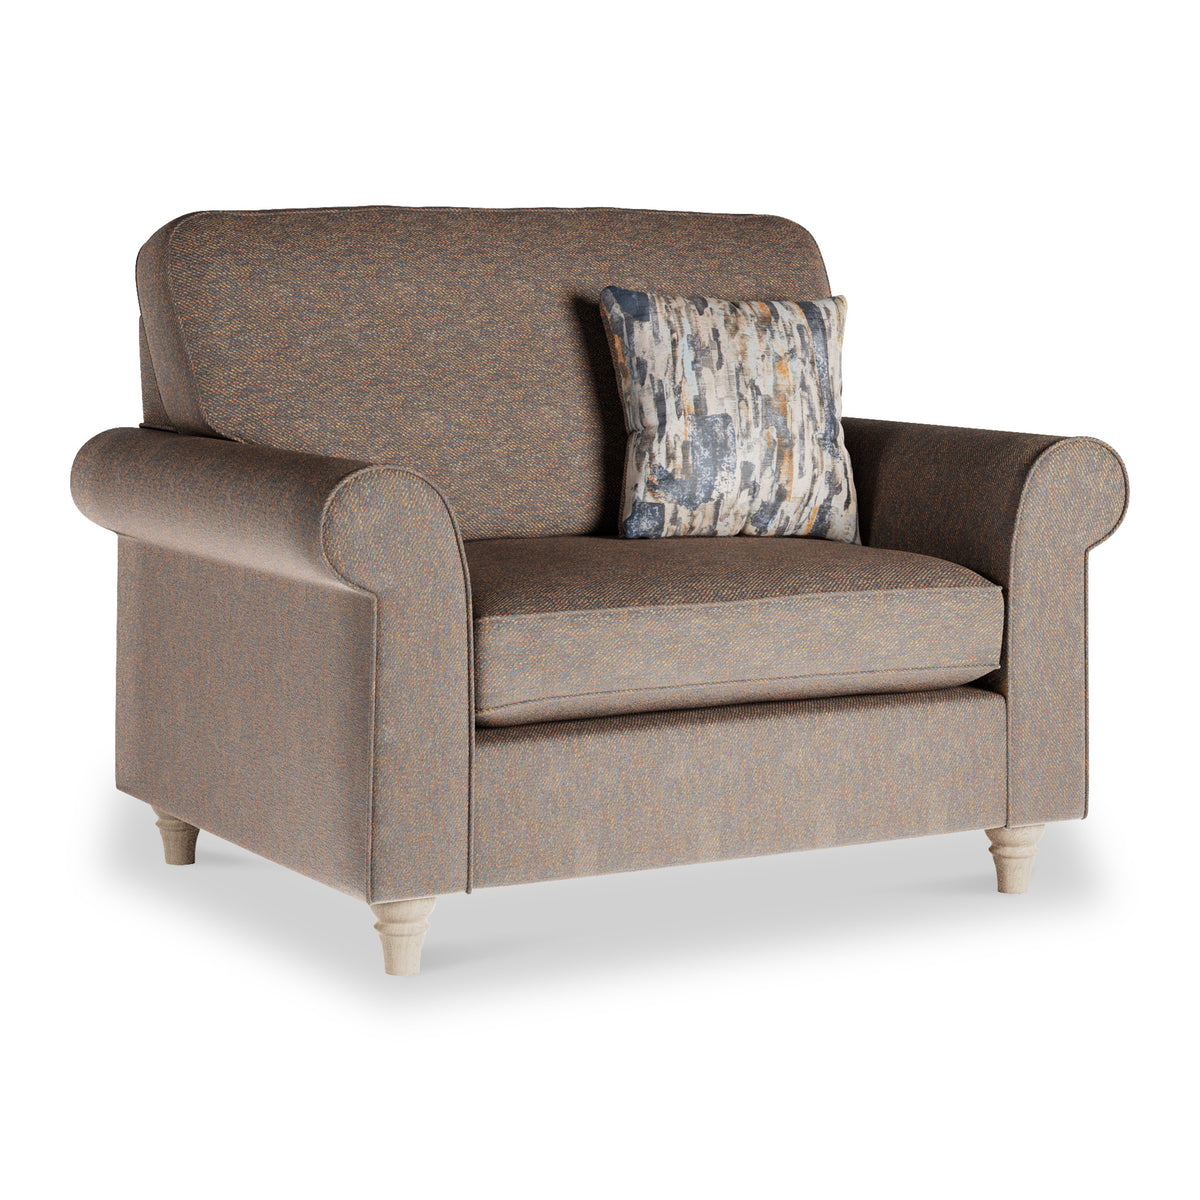 Jude Bonfire Snuggle Armchair from Roseland Furniture